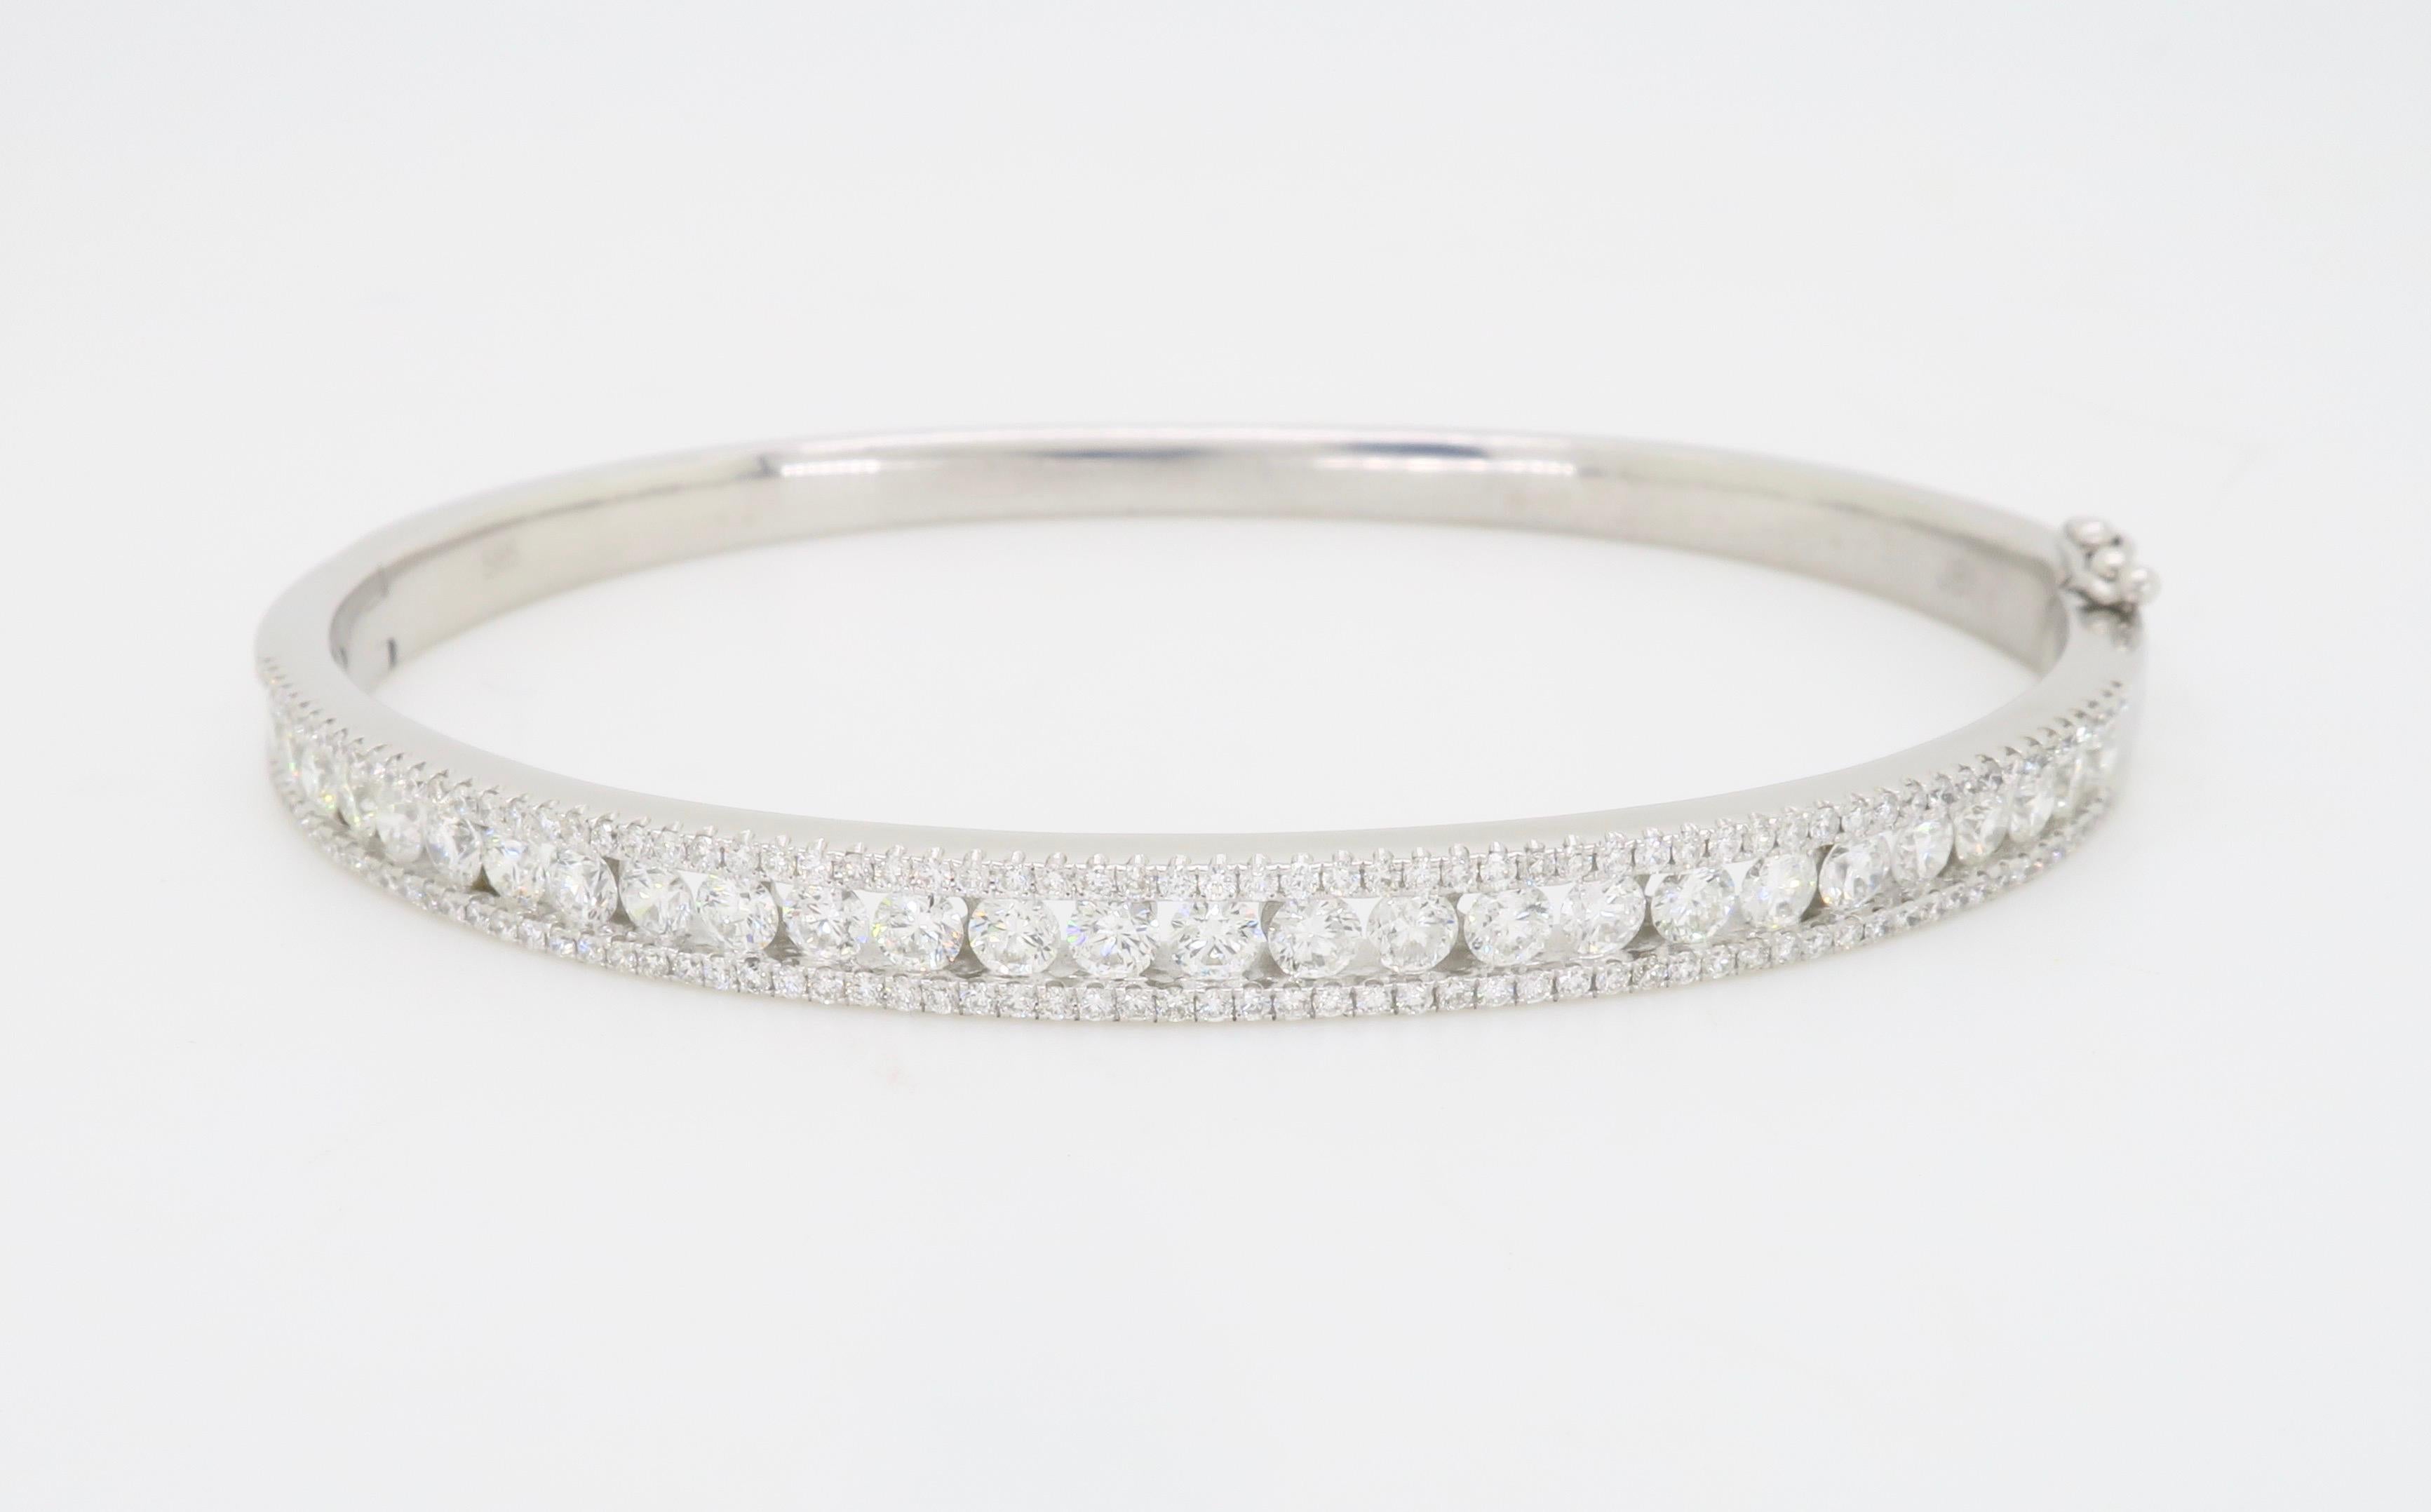 Hinged Diamond bangle bracelet crafted beautifully in 14k white gold. 

Diamond Carat Weight: Approximately 2.00CTW
Diamond Cut: Round Brilliant Cut 
Color: Average F-H
Clarity: Average VS-SI
Metal: 14K White Gold
Marked/Tested: Stamped  “585